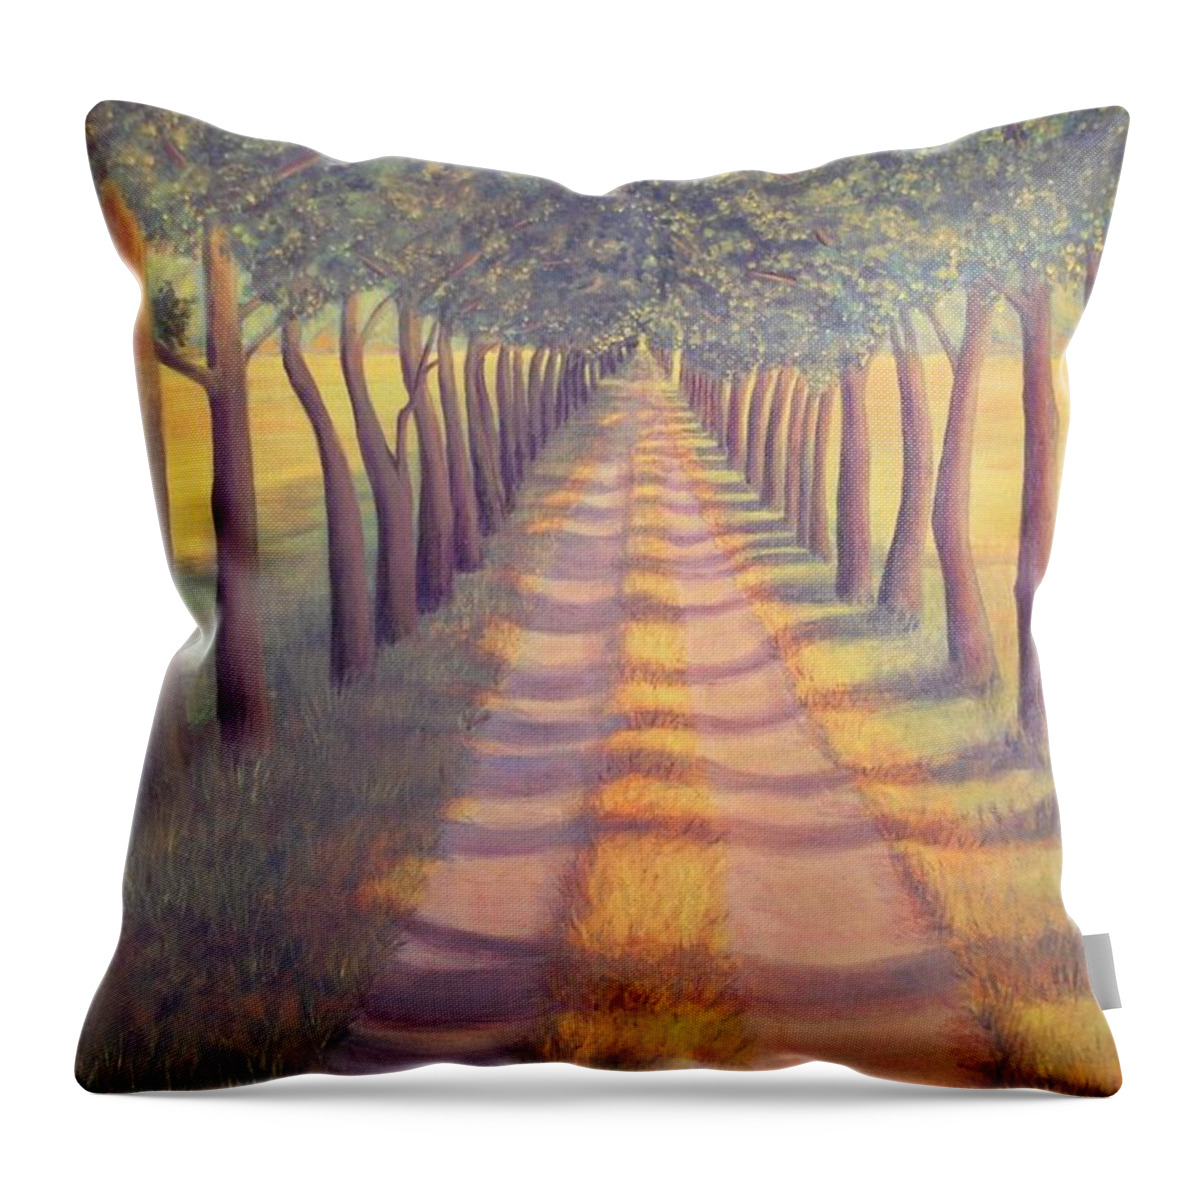 Landscape Throw Pillow featuring the painting Country Lane by SophiaArt Gallery